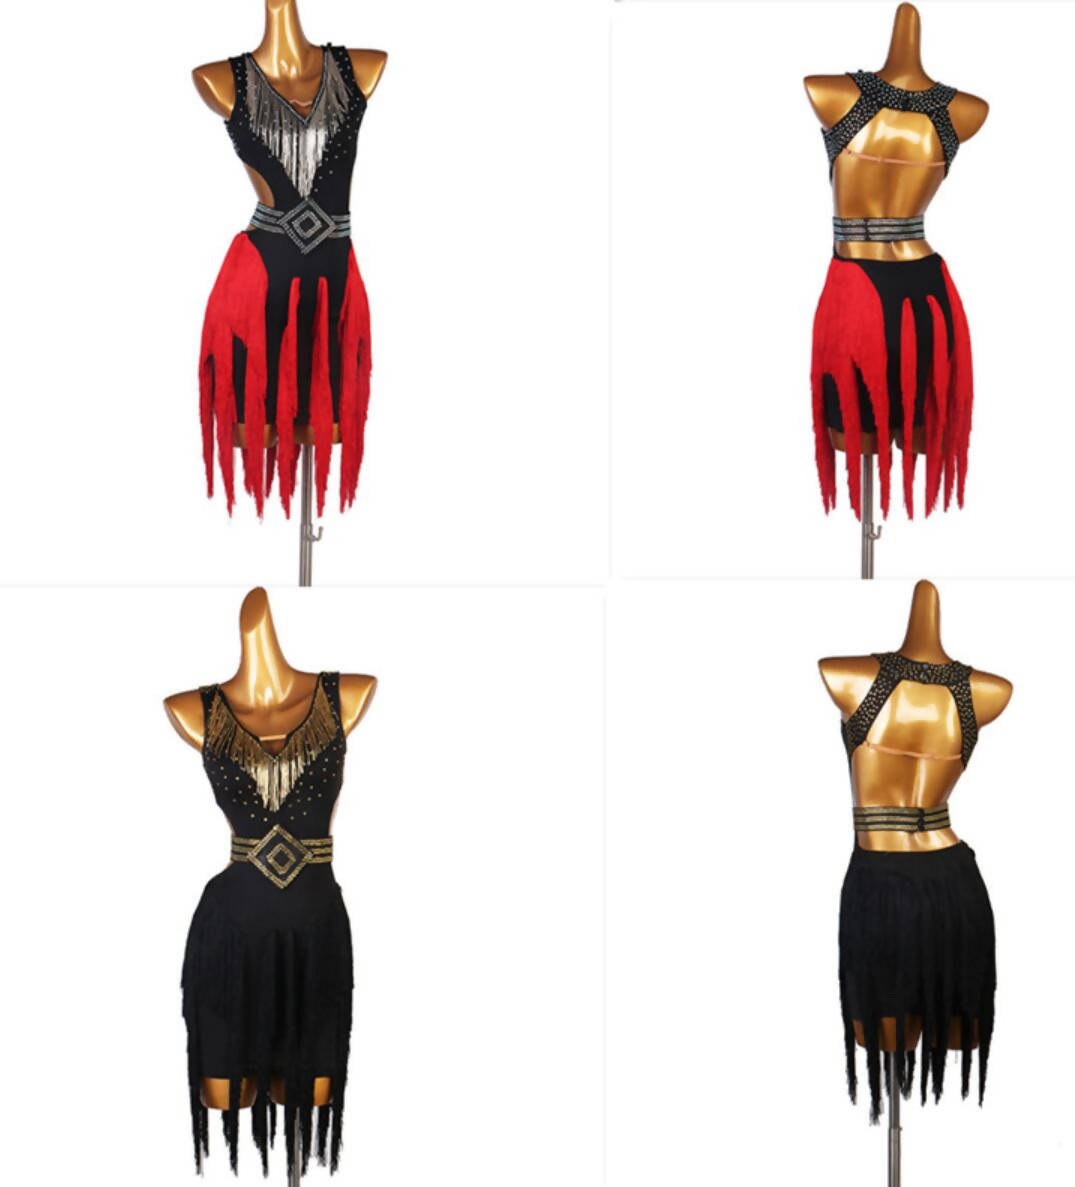 Latin costumes for sale